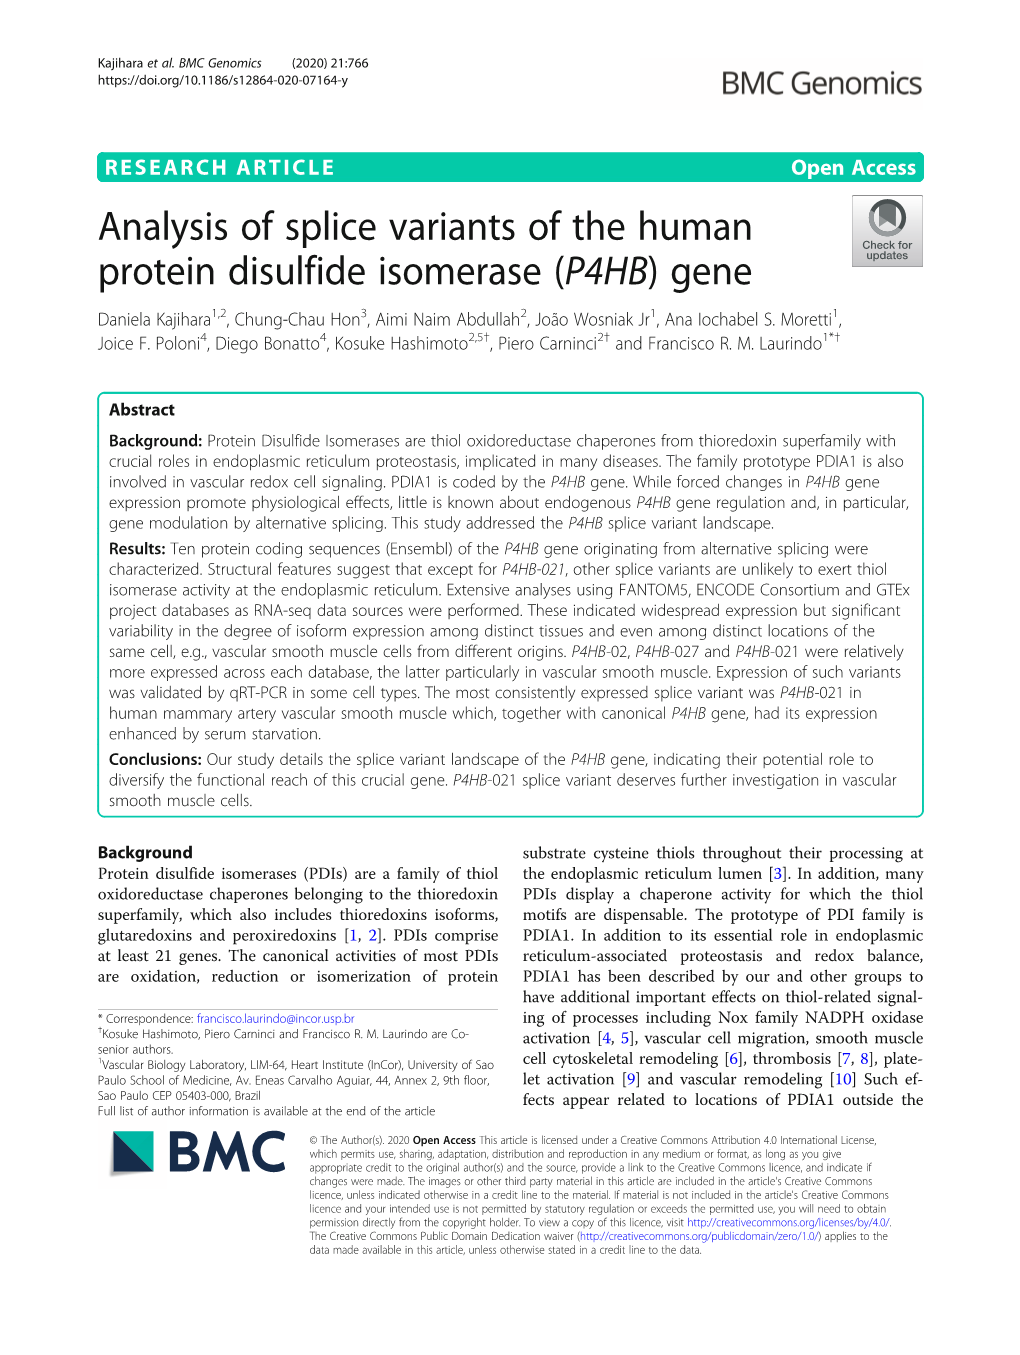 Analysis of Splice Variants of the Human Protein Disulfide Isomerase (P4HB) Gene